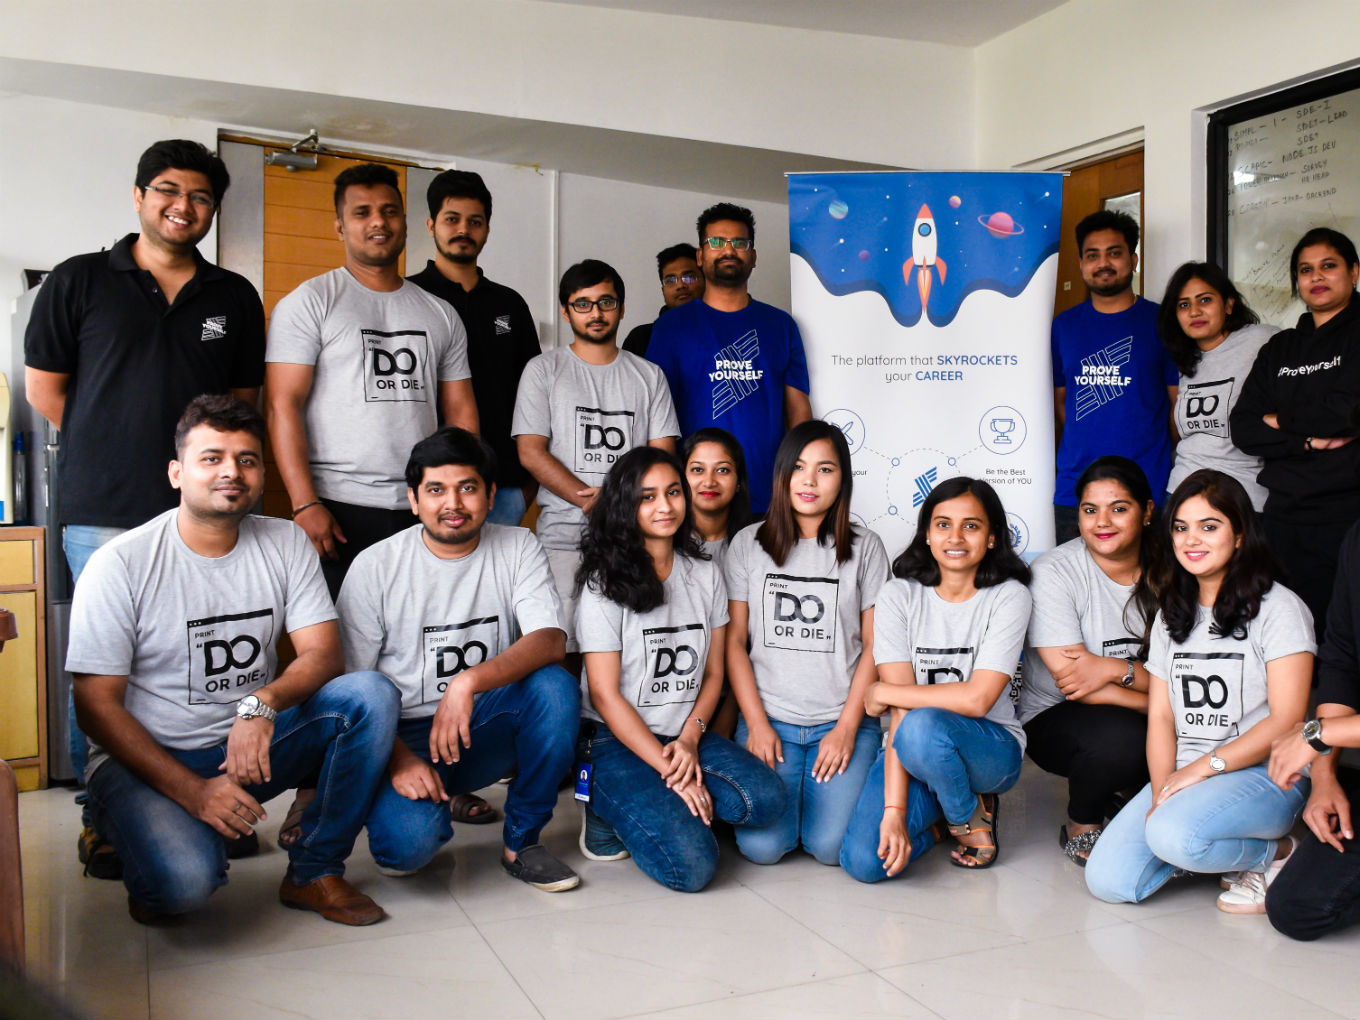 Exclusive: HRTech Startup Skillenza Raises $1 Mn Funding, Eyes 1 Mn Users By 2020